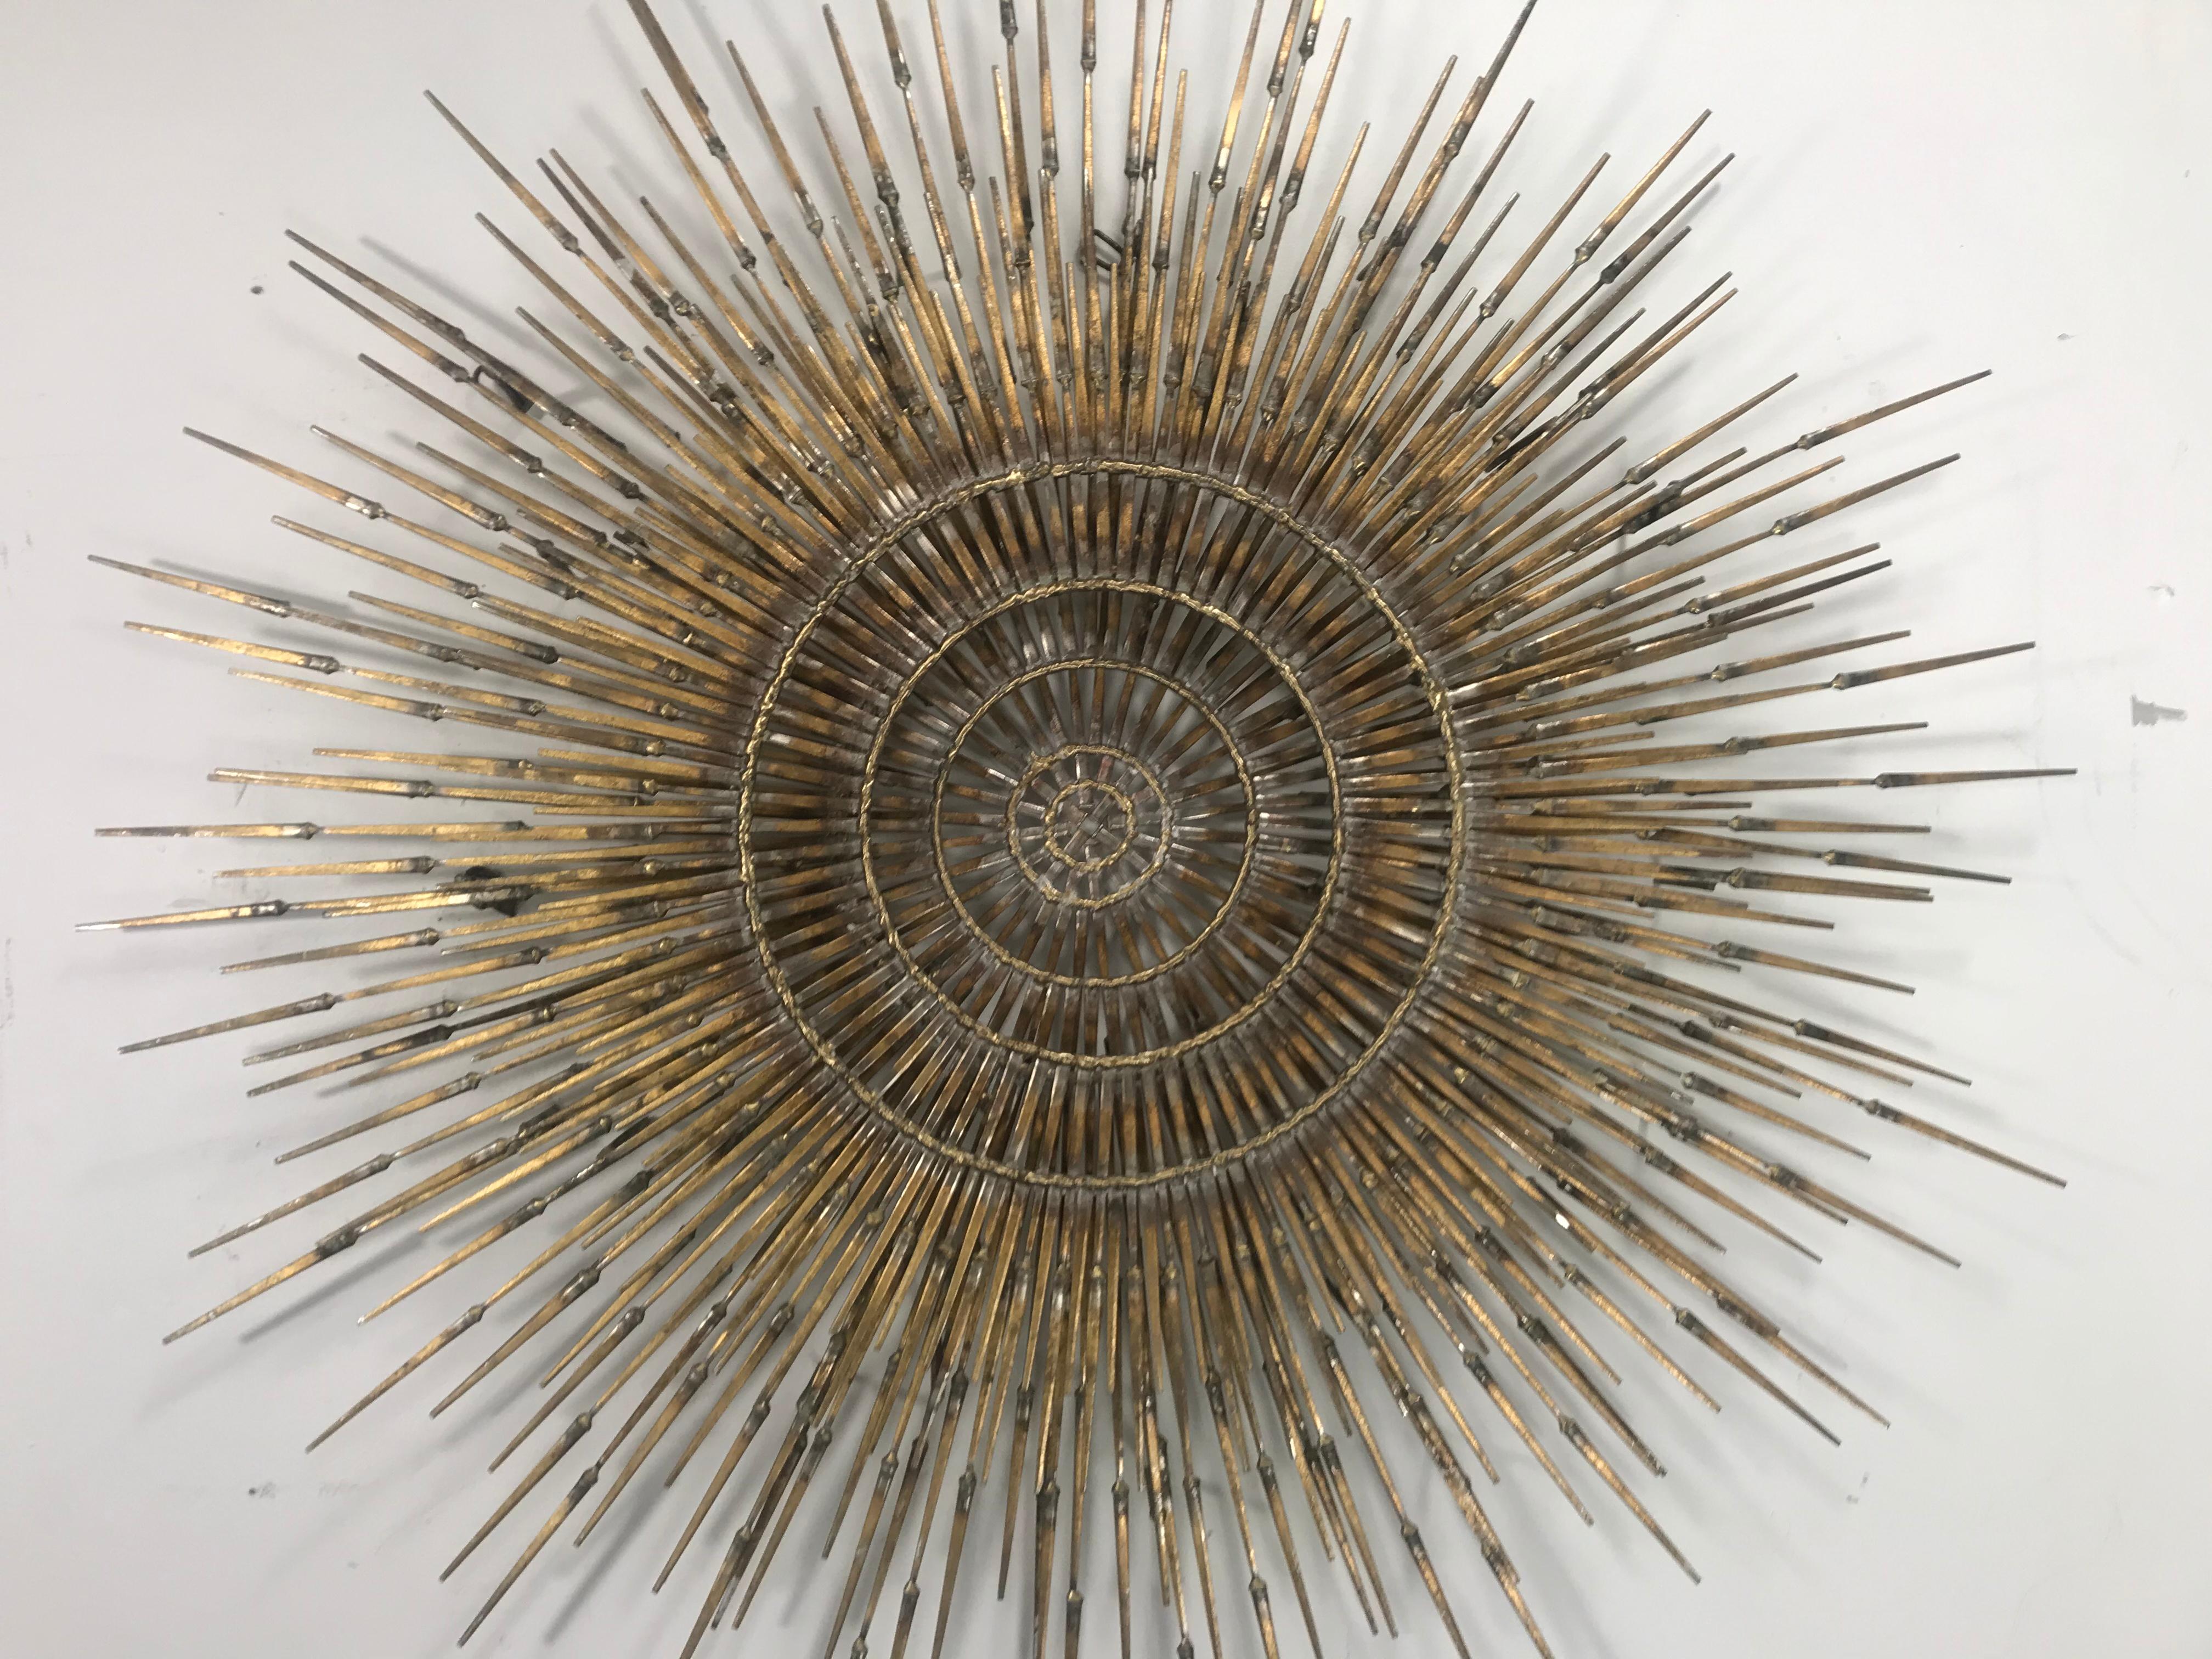 A large 4 layer Brutalist sunburst with starburst overlay nail art wall sculpture by Ron Schmidt.

Very uncommon multiplanar design with brass welded iron nail rays radiating sunburst-style from a central brass ring that floats in front of an open